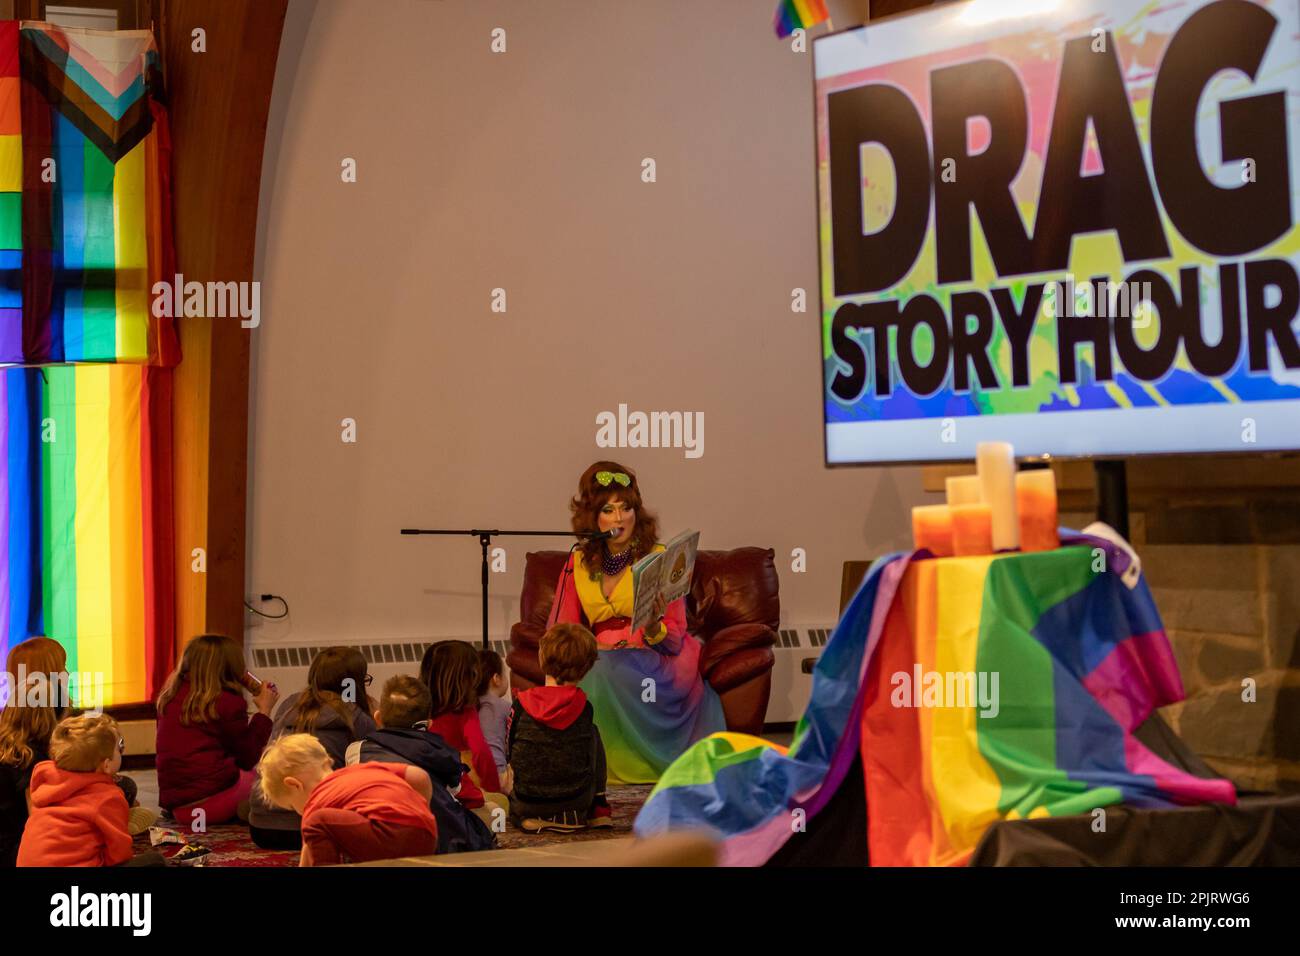 CHESTERLAND, OHIO - APRIL 1: A Drag performer reads a children's book at The Community Church of Chesterland's Drag Queen Story Hour on April 1, 2023 in Chesterland, Ohio. The heightened security at the church, which was reportedly firebombed a week before the event, comes on the heels of a recent spike of anti-drag demonstrations in Ohio communities and across the country.  (Photo by Michael Nigro) (Photo by Michael Nigro/Pacific Press) Stock Photo